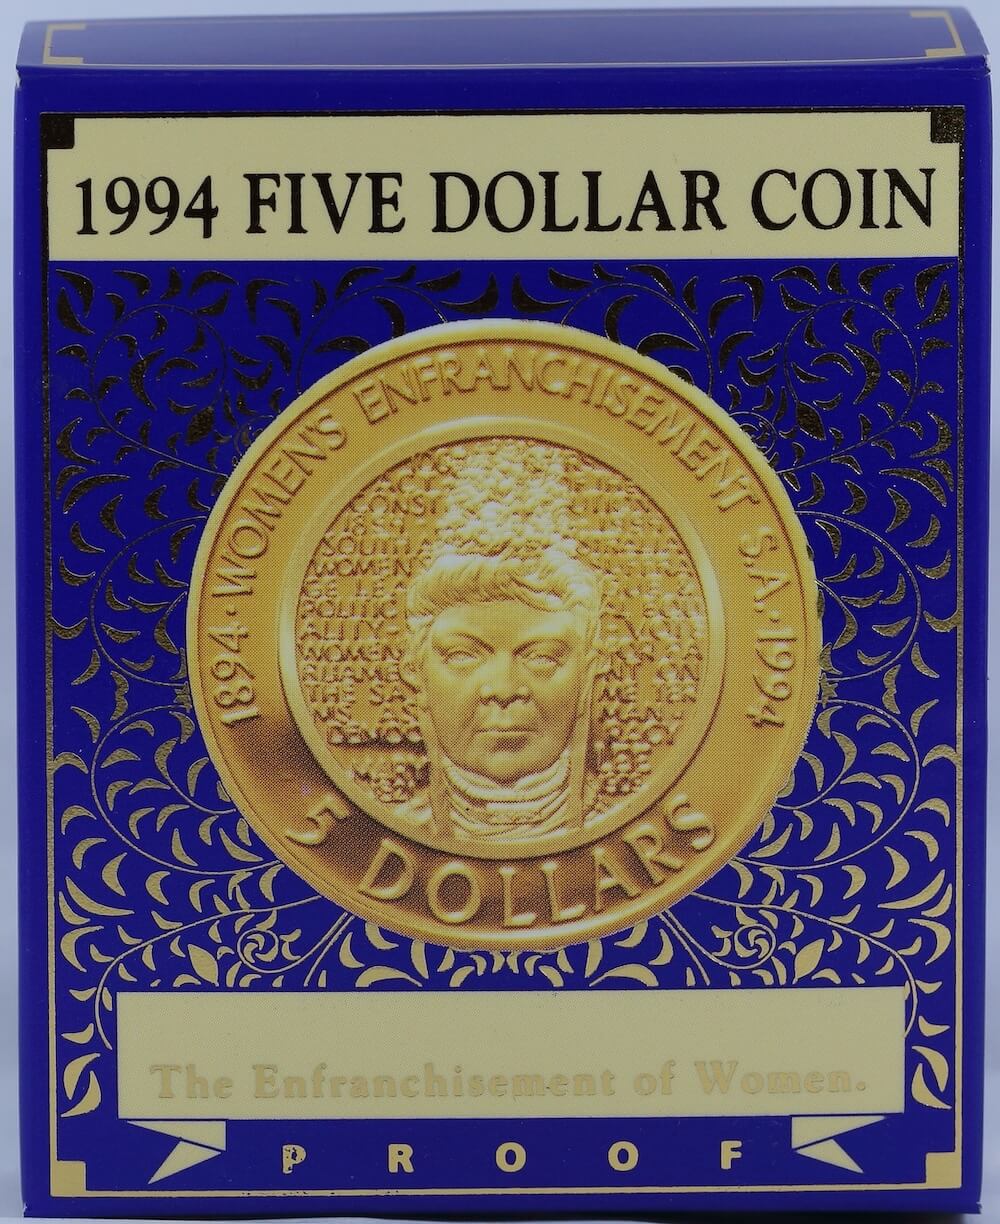 1994 Five Dollar Proof Coin - Centenary of the Enfranchisement of Women product image